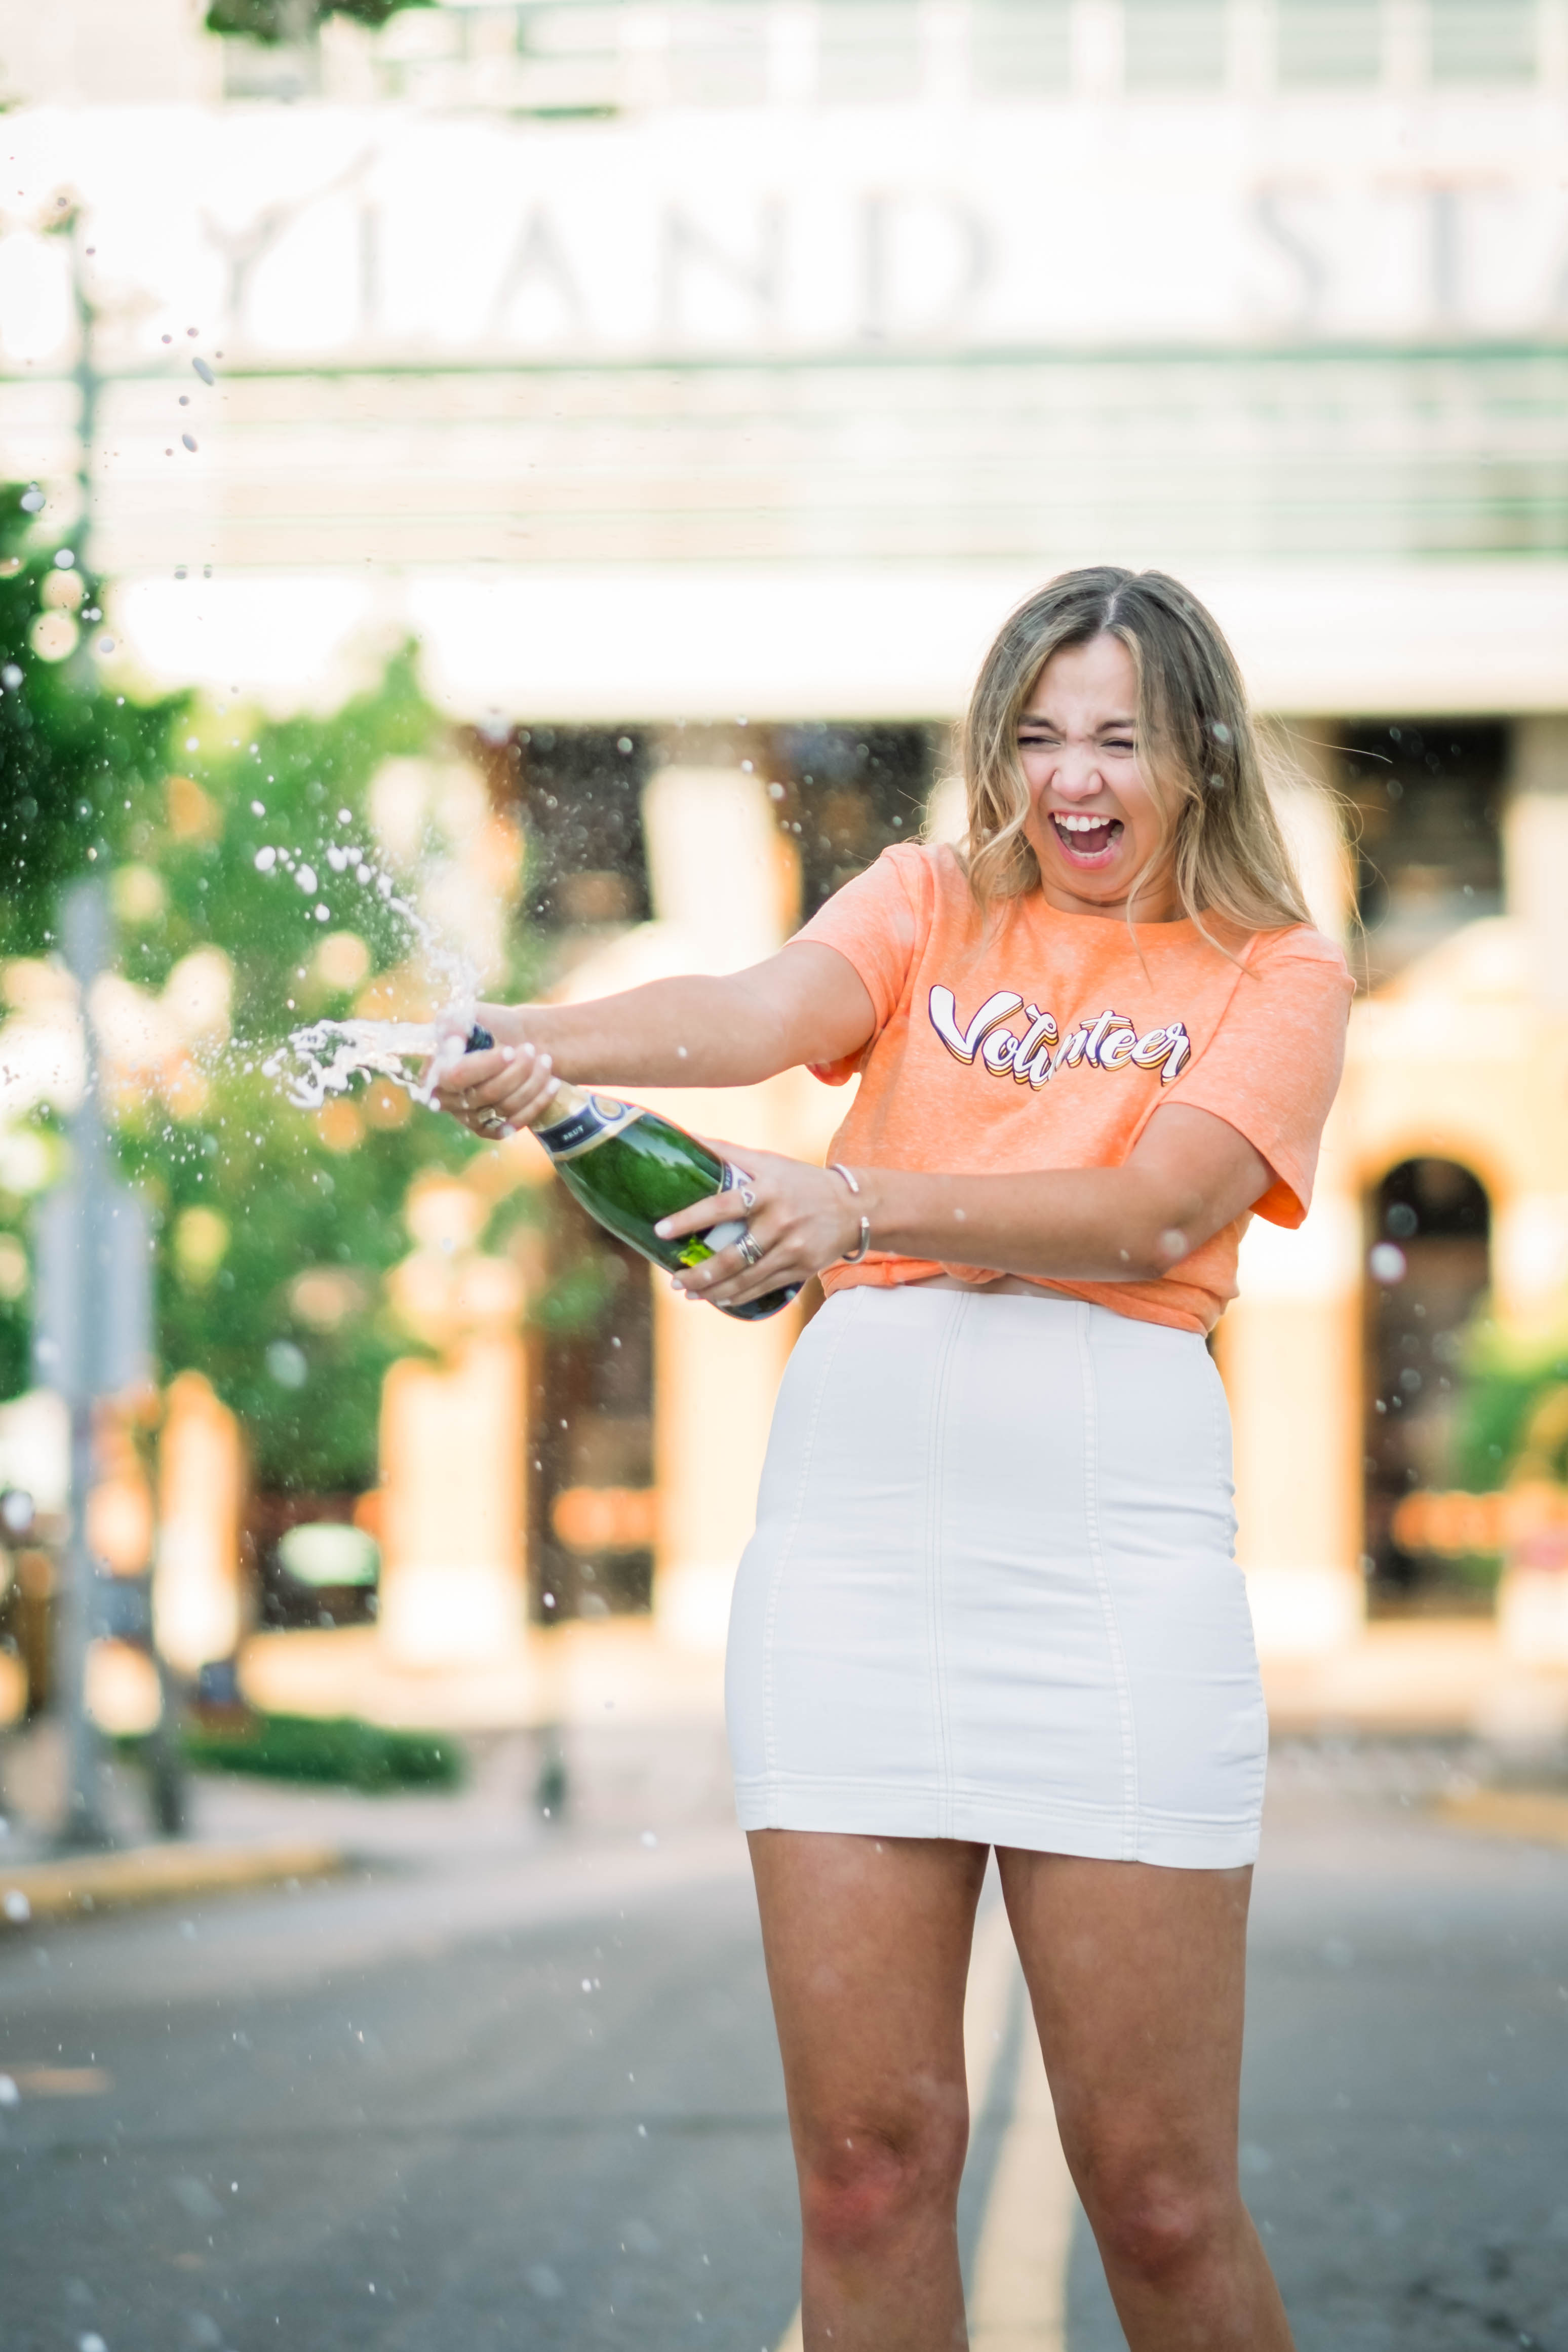 Champagne Popping at Neyland Stadium at the University of Tennessee graduation pictures | www.besspics.com